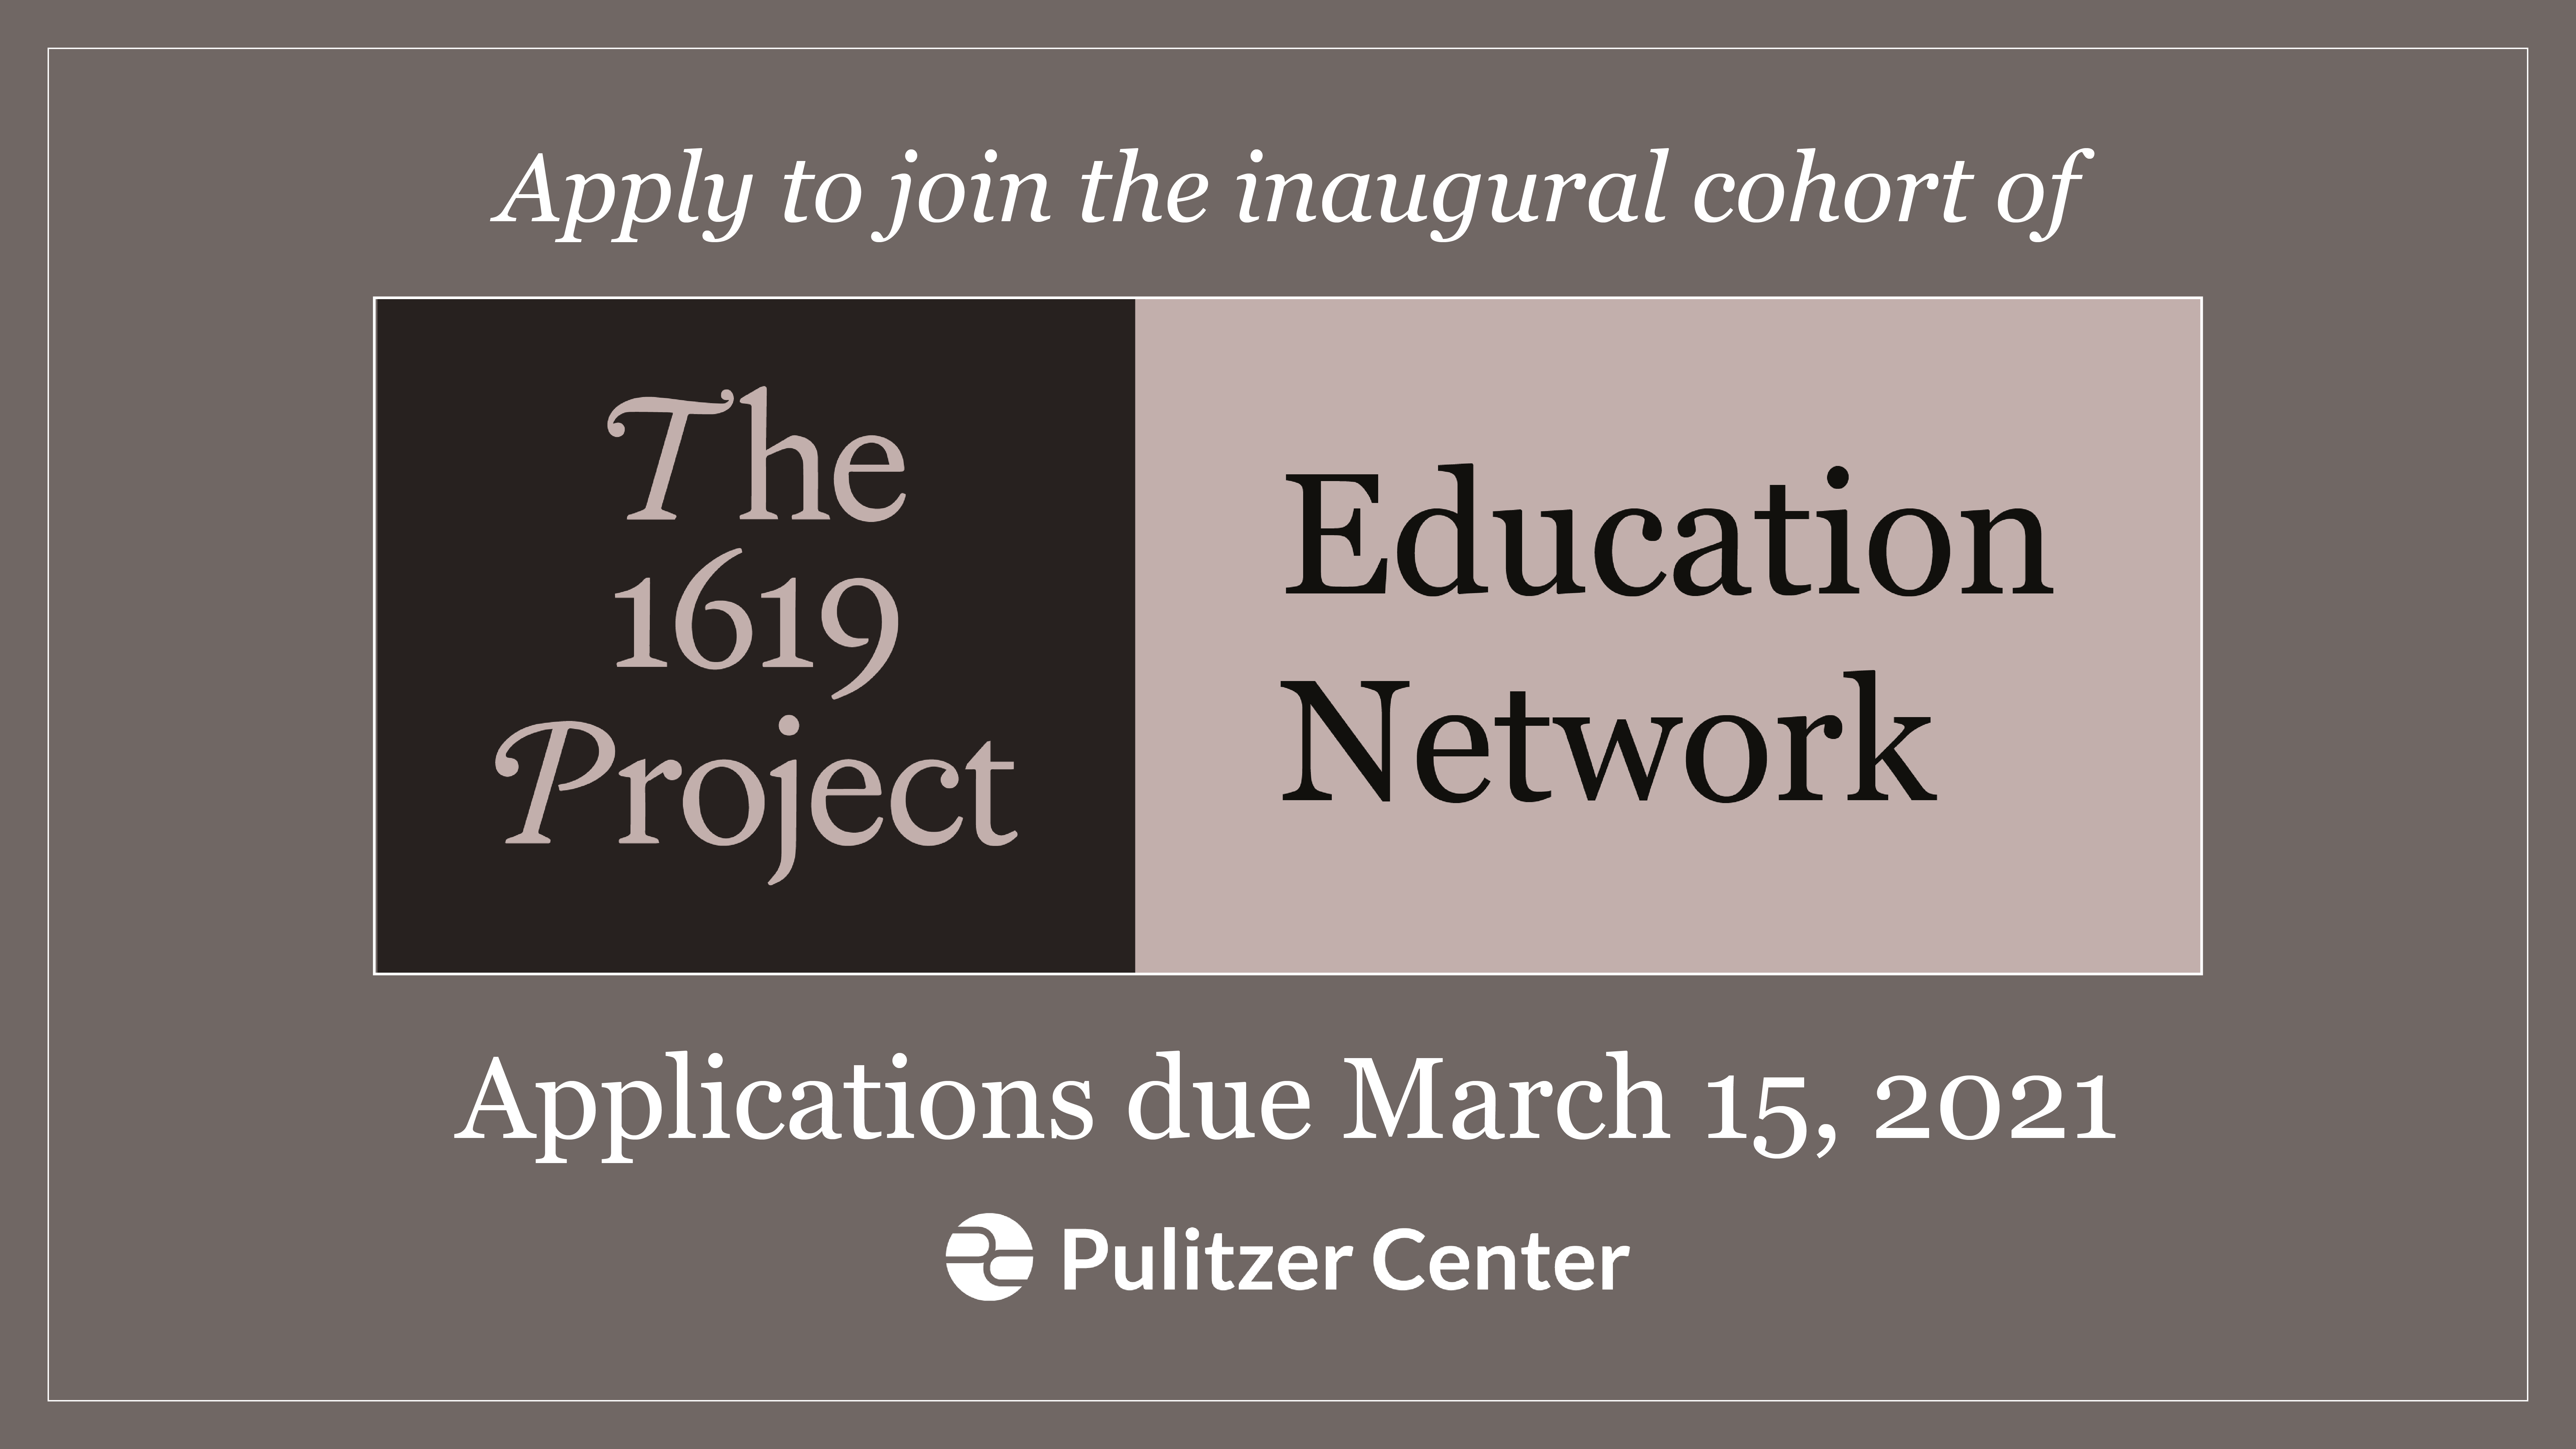 $5,000 grants to education professionals! Applications due March 15!